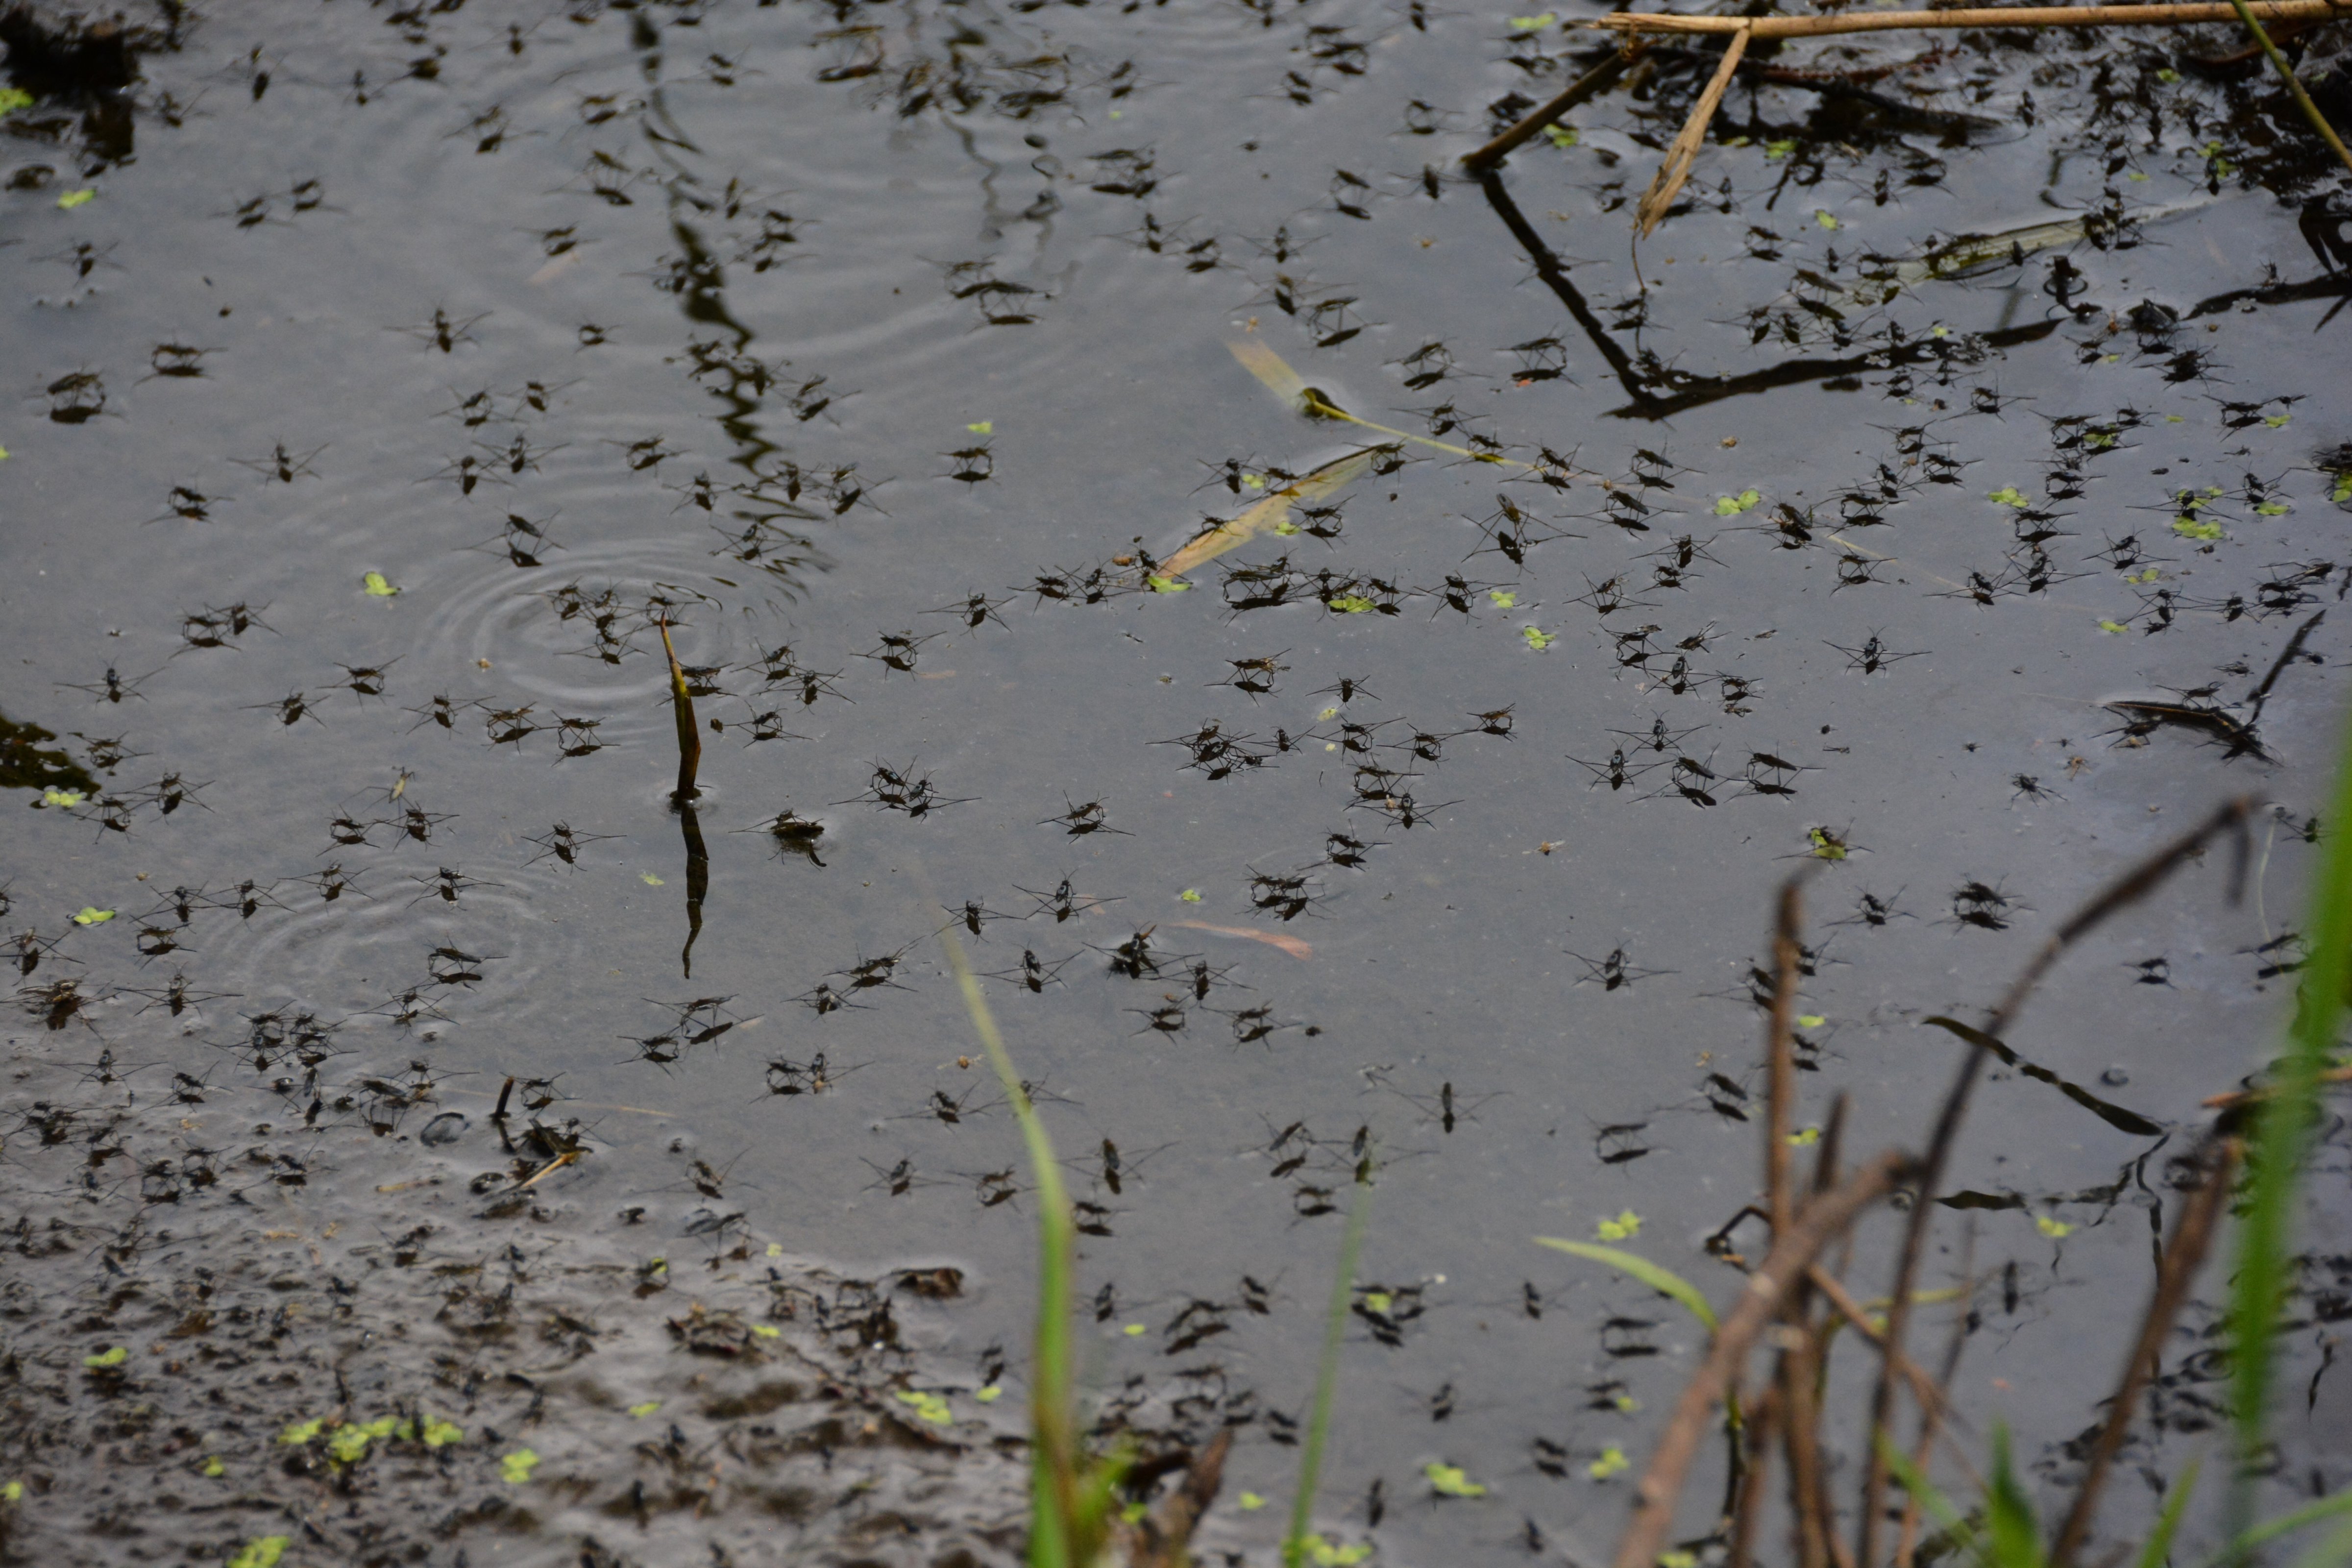 High Angle View Of Mosquitos On Water Surface